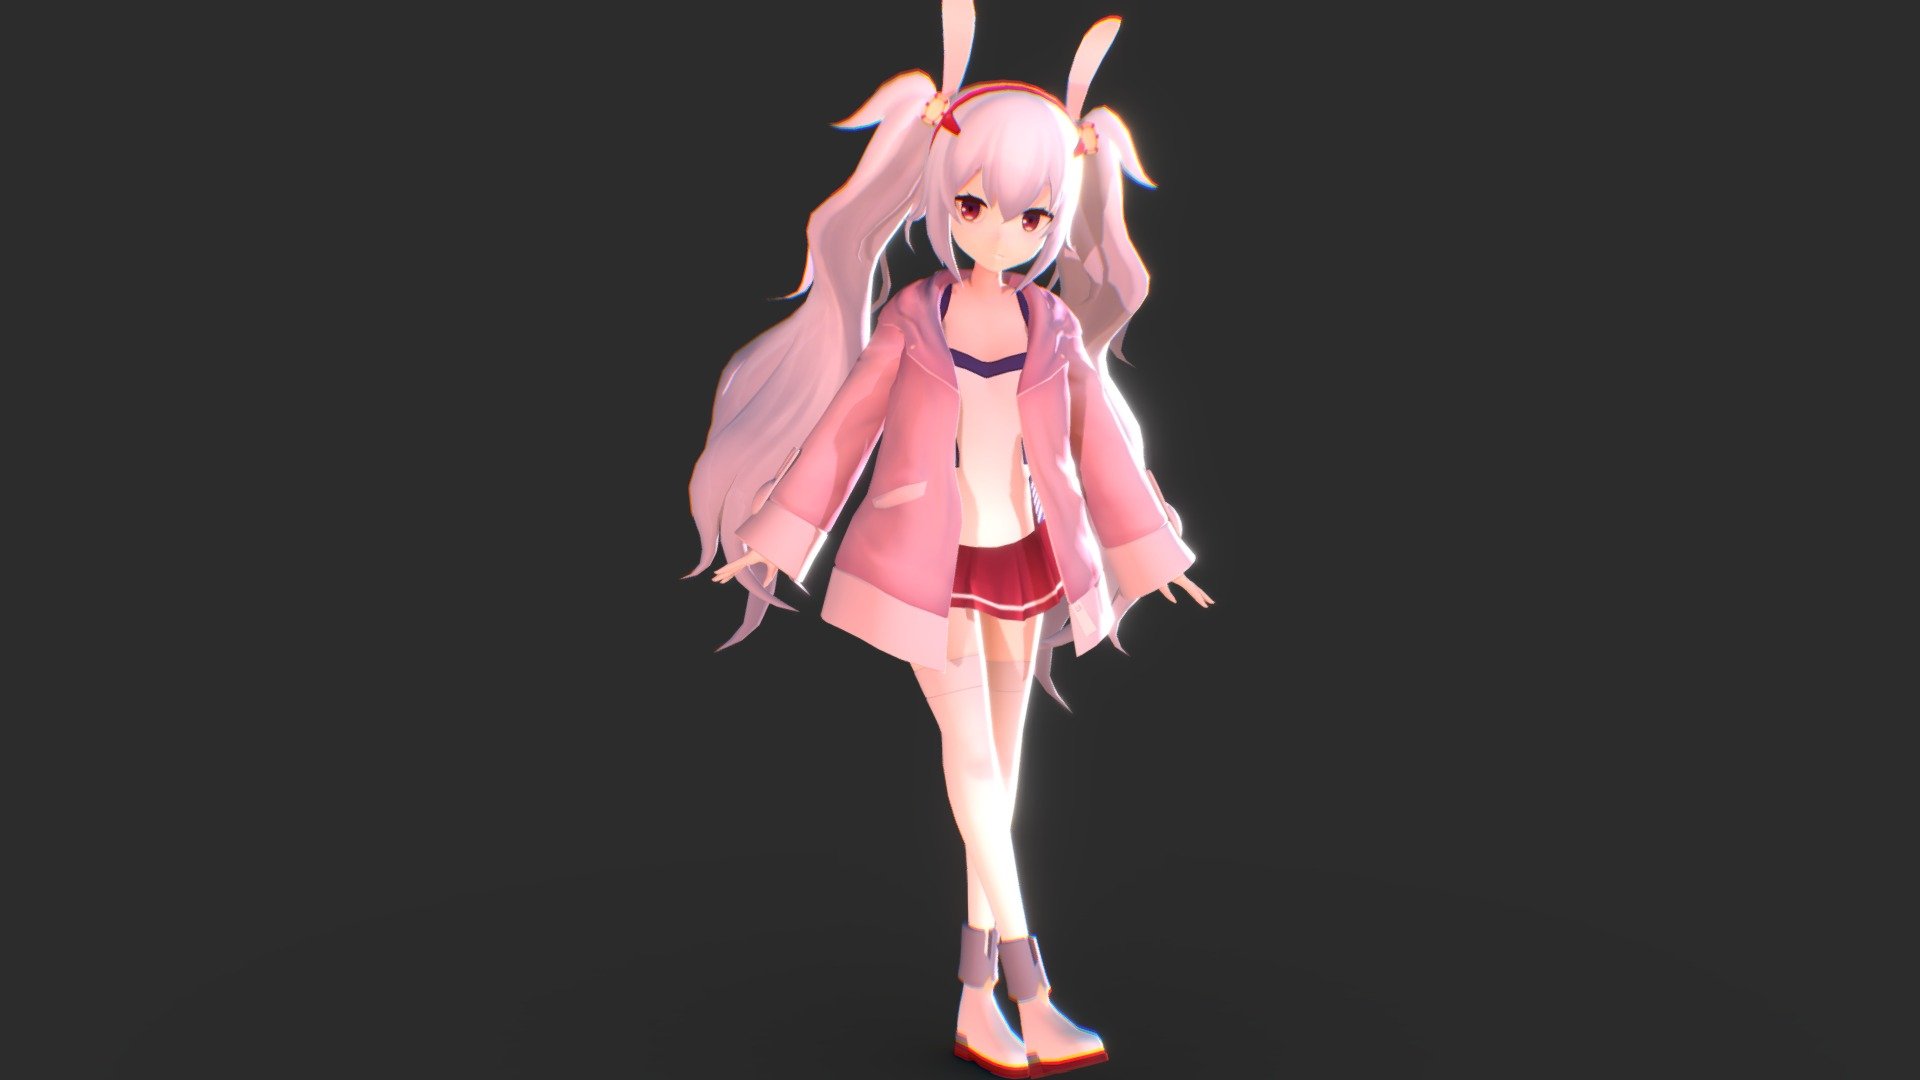 For work in progress and updates follow me on my Twitter!
The model is created and rigged in Maya2016, textured on 3DCoat.

Used Unity2017.4.28f1
UnityPackage file contain FBX, VRM and VRChat Prefab. Along with all the assets UniVRM 0.53.0 and VRCSDK 2019.09.18.12.5 dependencies and extra dance animations.

Also contains an Original FBX if you want to set up yourself.

VRChat Preview:

https://twitter.com/tidusyuna09/status/1184760023261442049

Few workflow Sample and VRM:

https://twitter.com/tidusyuna09/status/1184701355883032576

https://twitter.com/tidusyuna09/status/1184702203732221952

And other post on how I do my work creating the model.

This model will be back on the STORE Soon!

A proof that the 3D model I made works.

https://twitter.com/mi_so_ka/status/1393799431938400261 - Azure Lane Laffey - Buy Royalty Free 3D model by Mark Escuadro (@tidusyuna09) 3d model